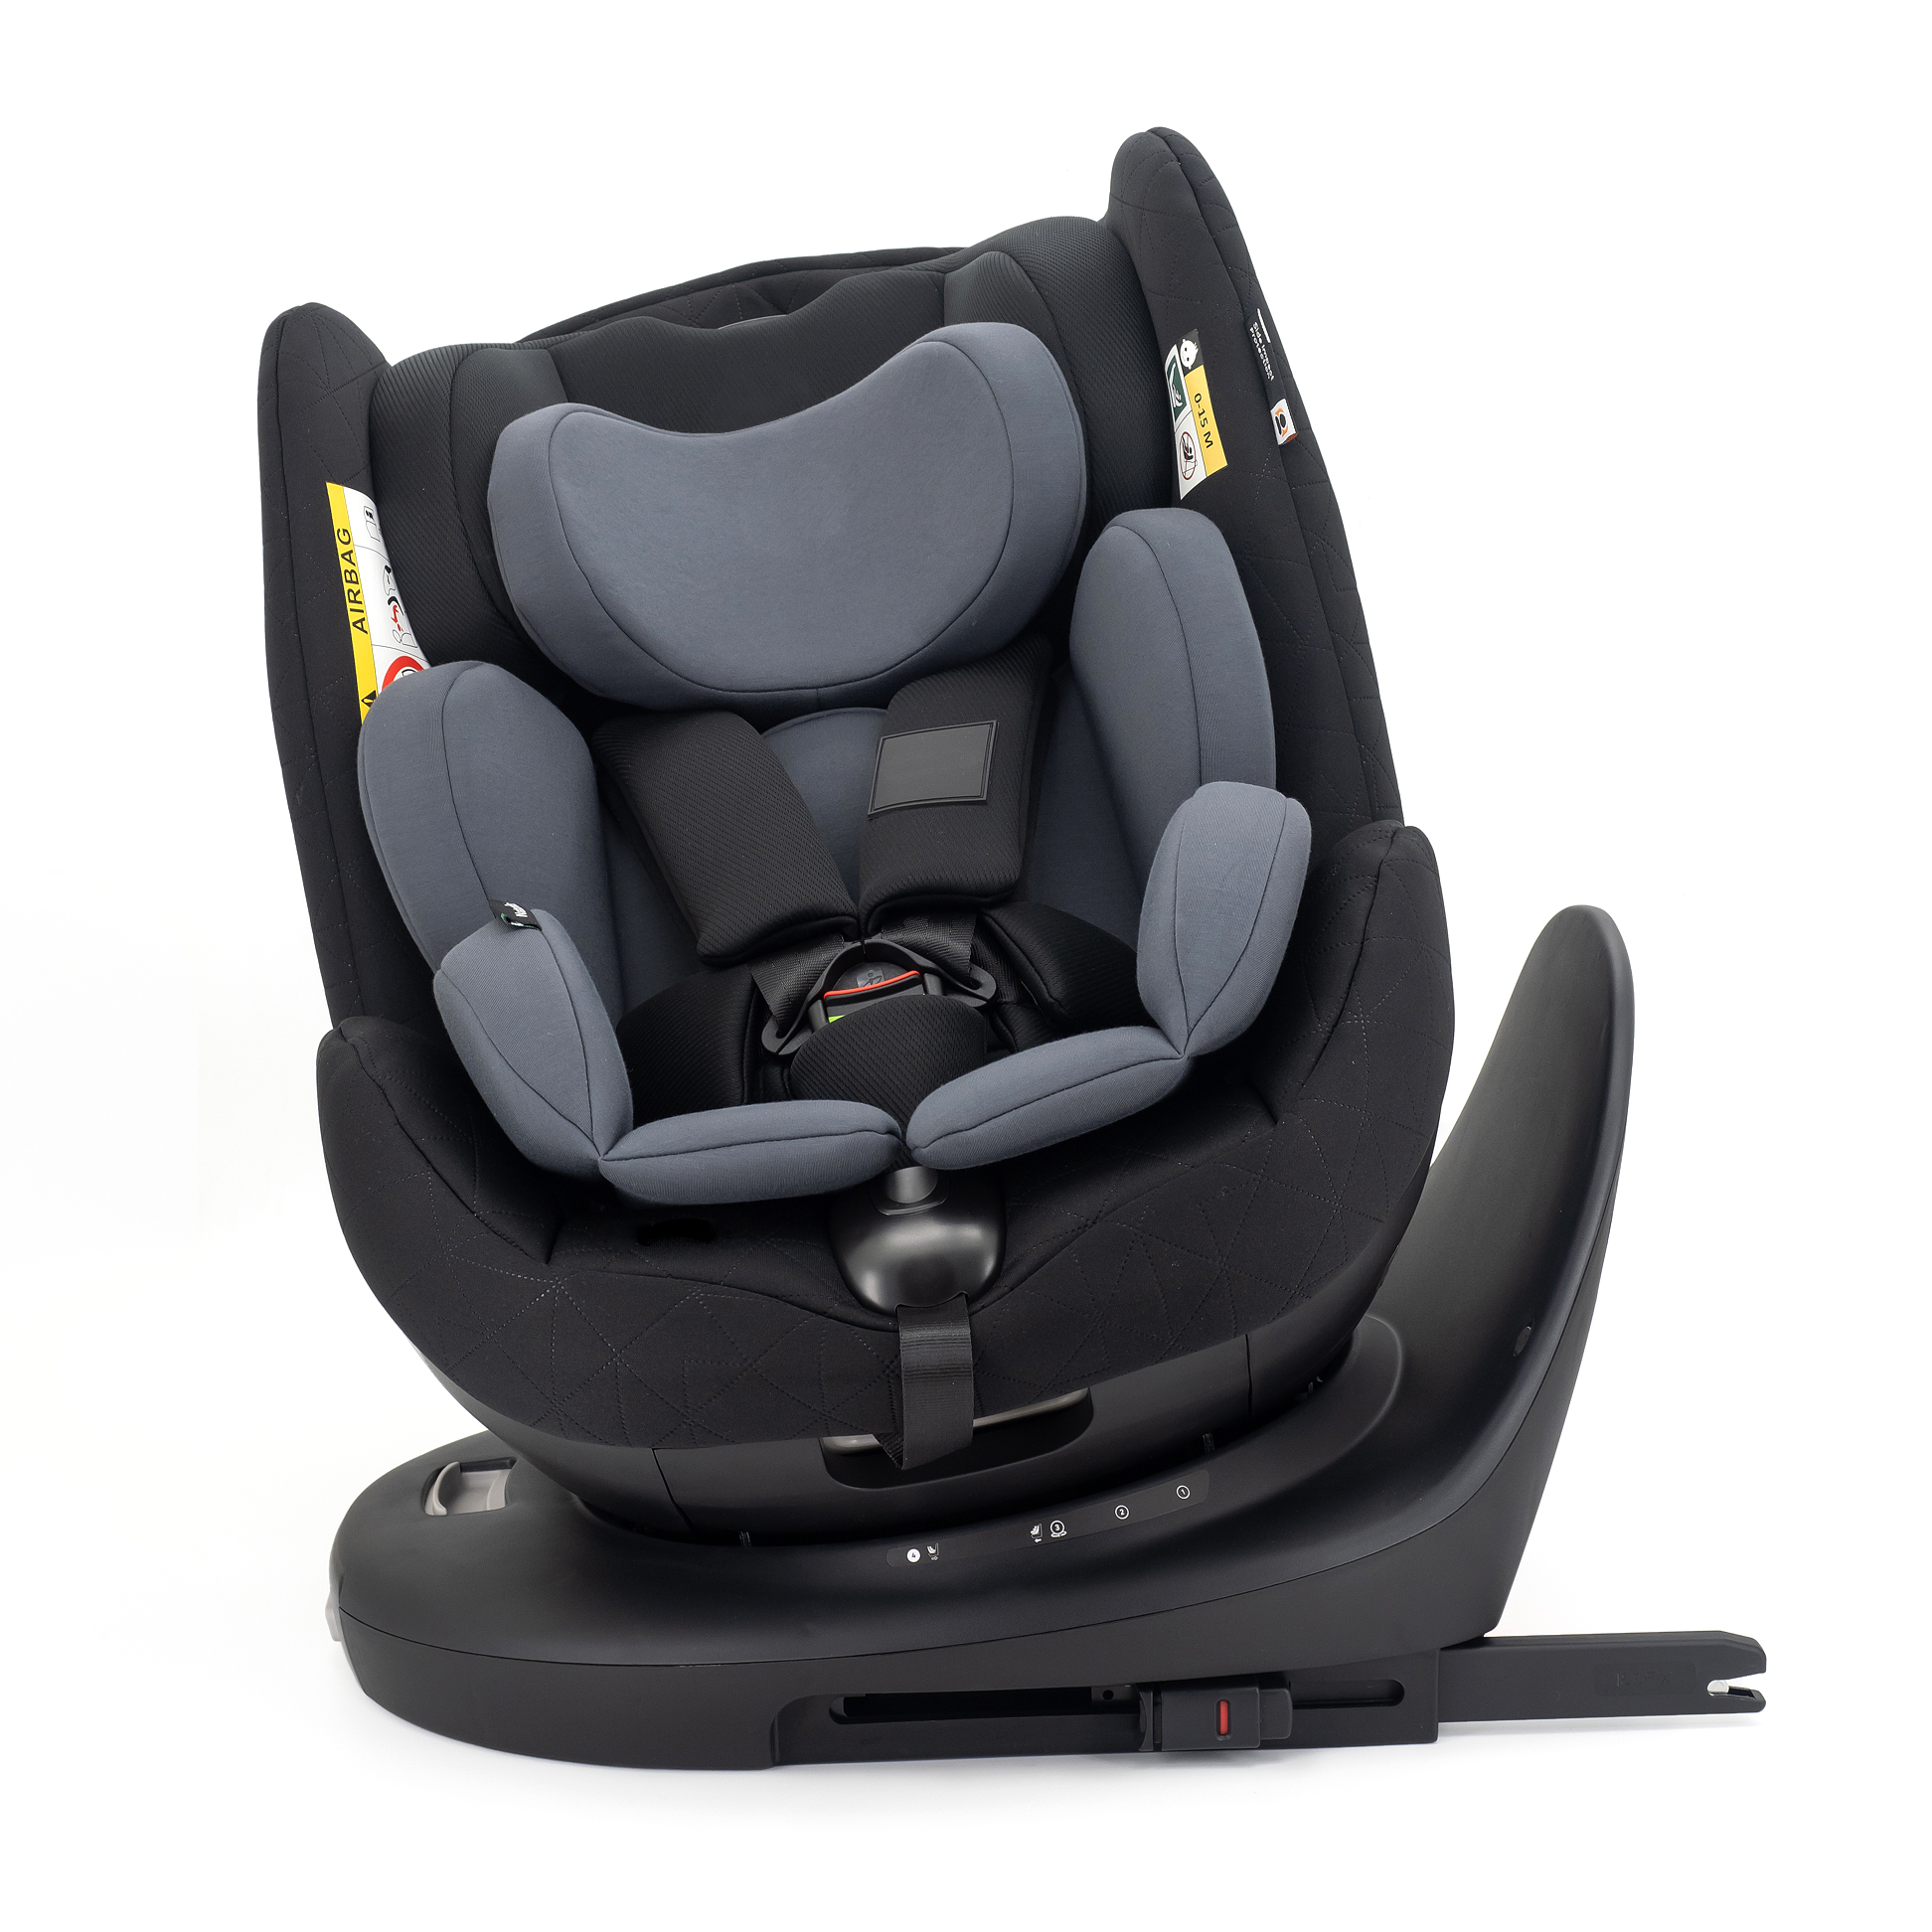 Black Convertible Rear-Facing Car Seat for 1 Year Old